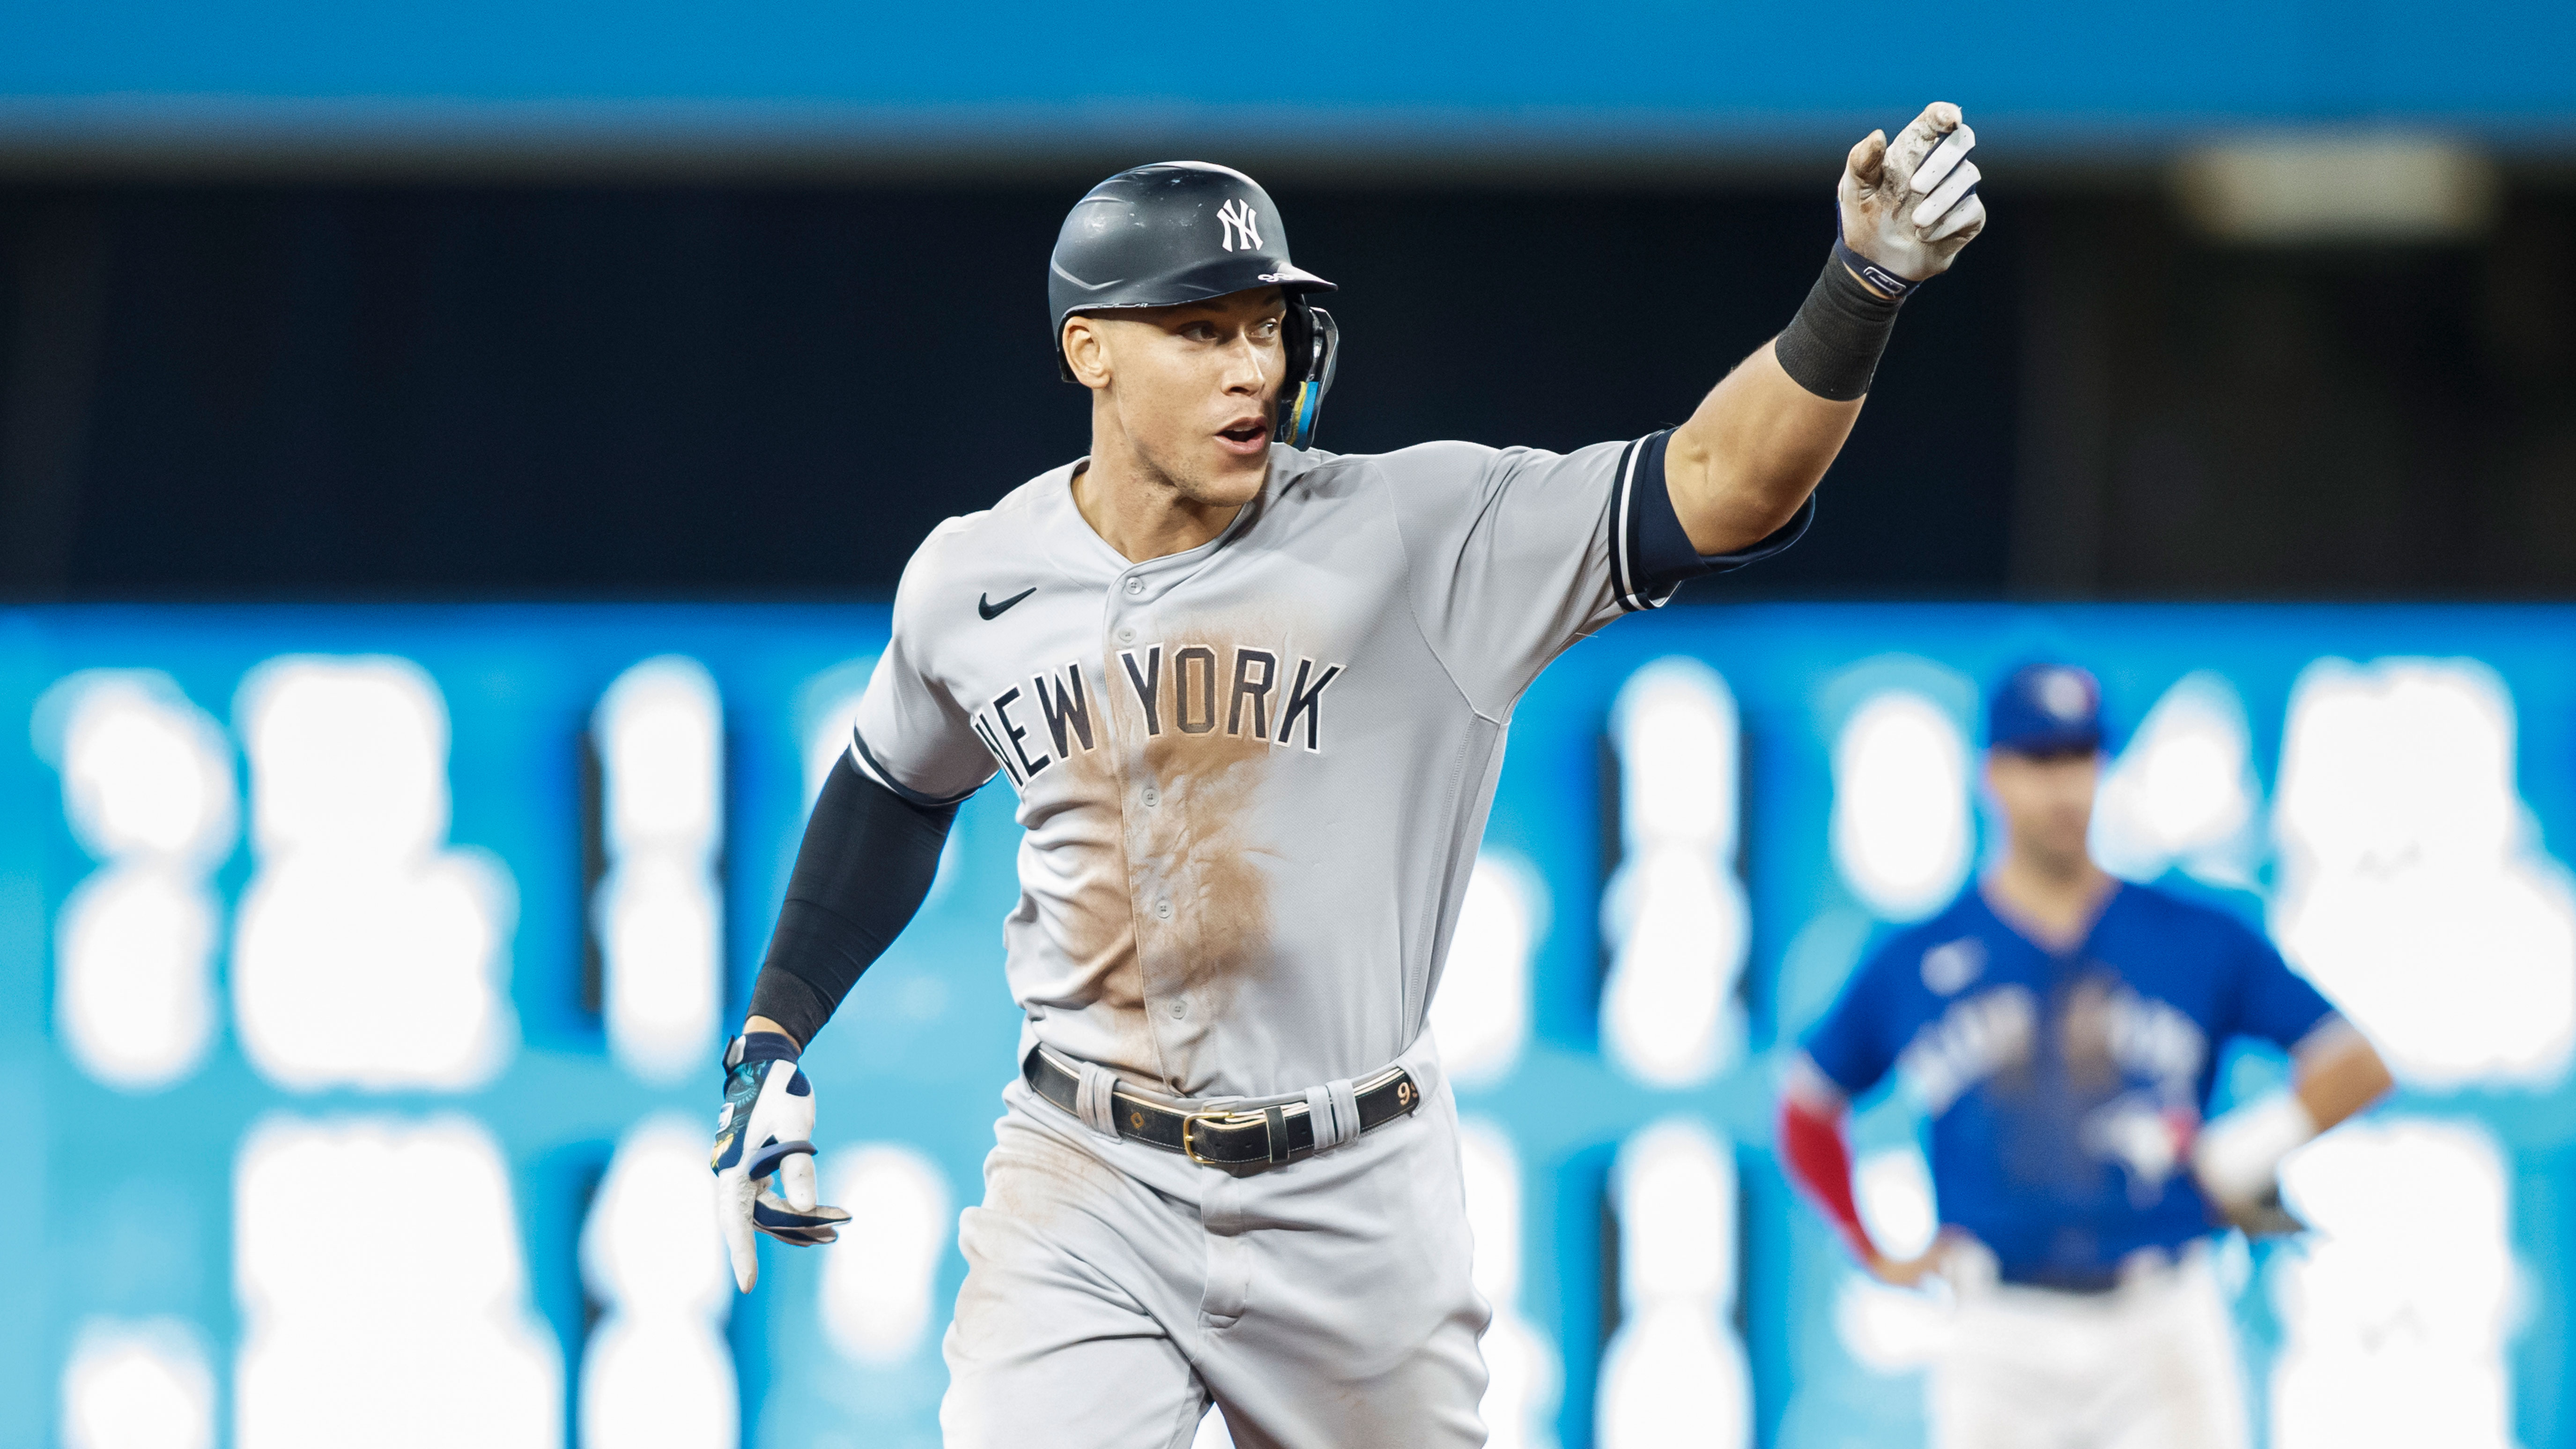 Yankees ticket prices for potential Aaron Judge No. 62 HR game